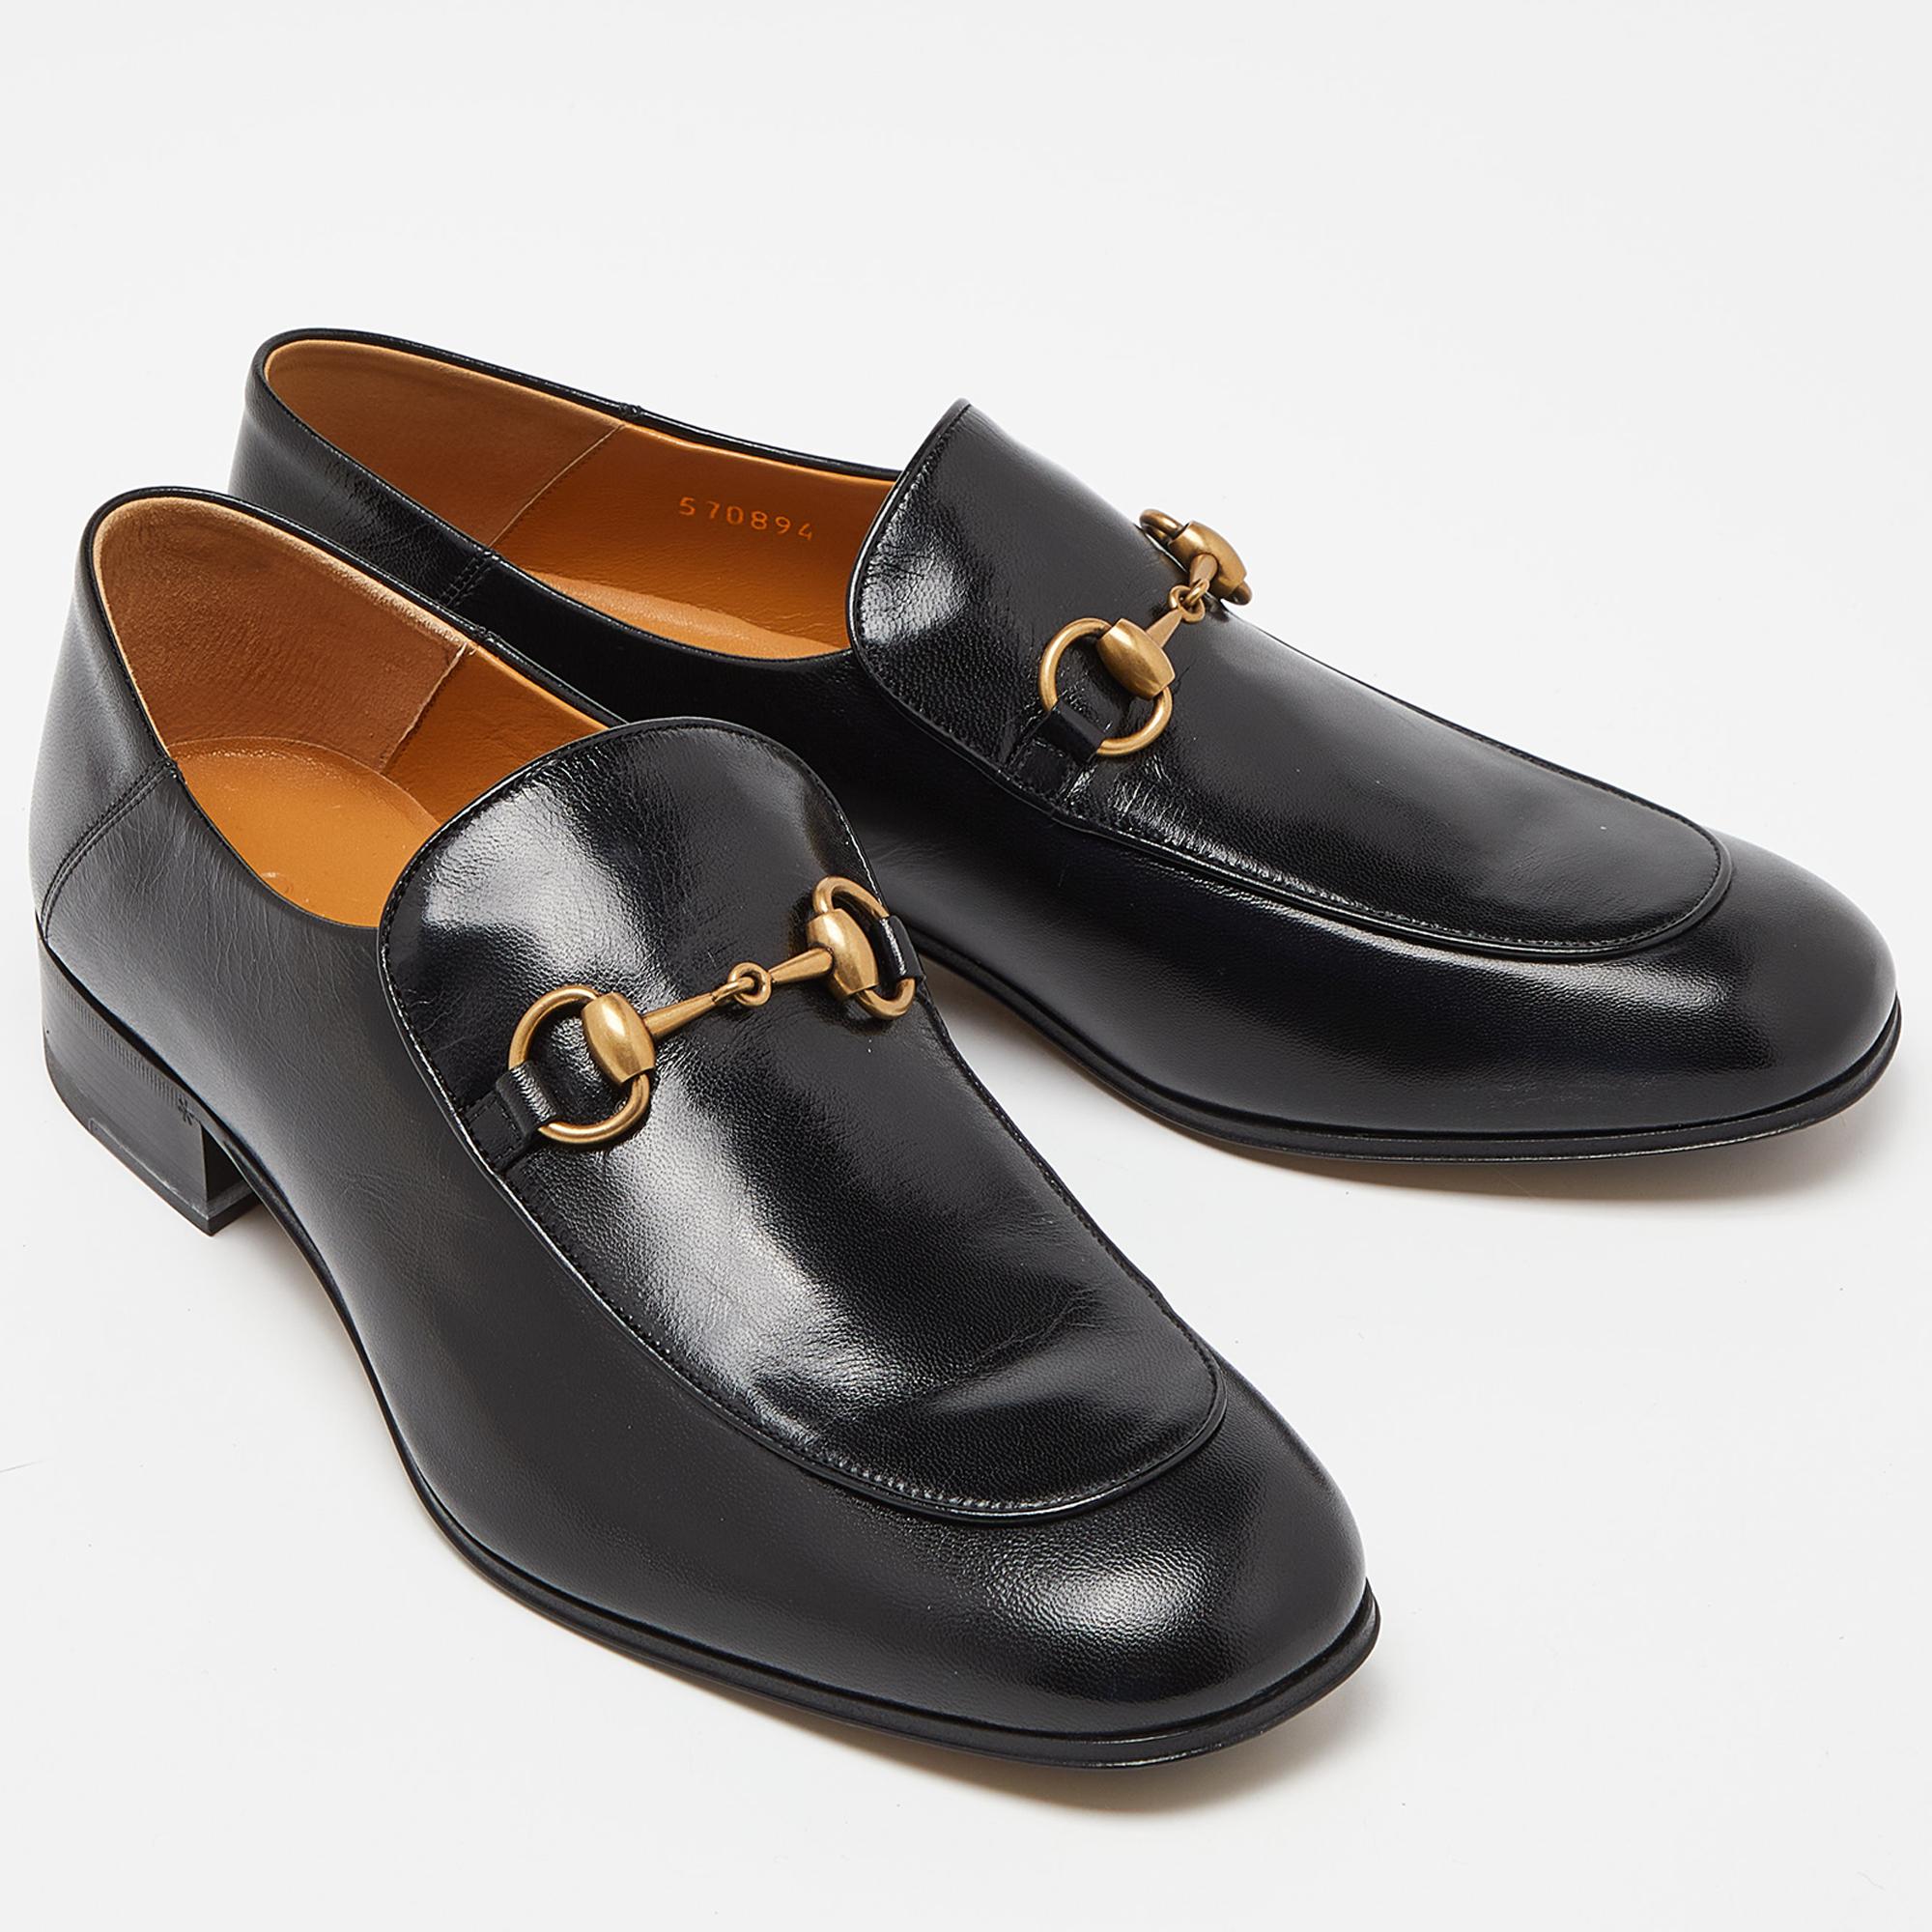 Gucci Black Leather Horsebit Loafers Size 43.5 1